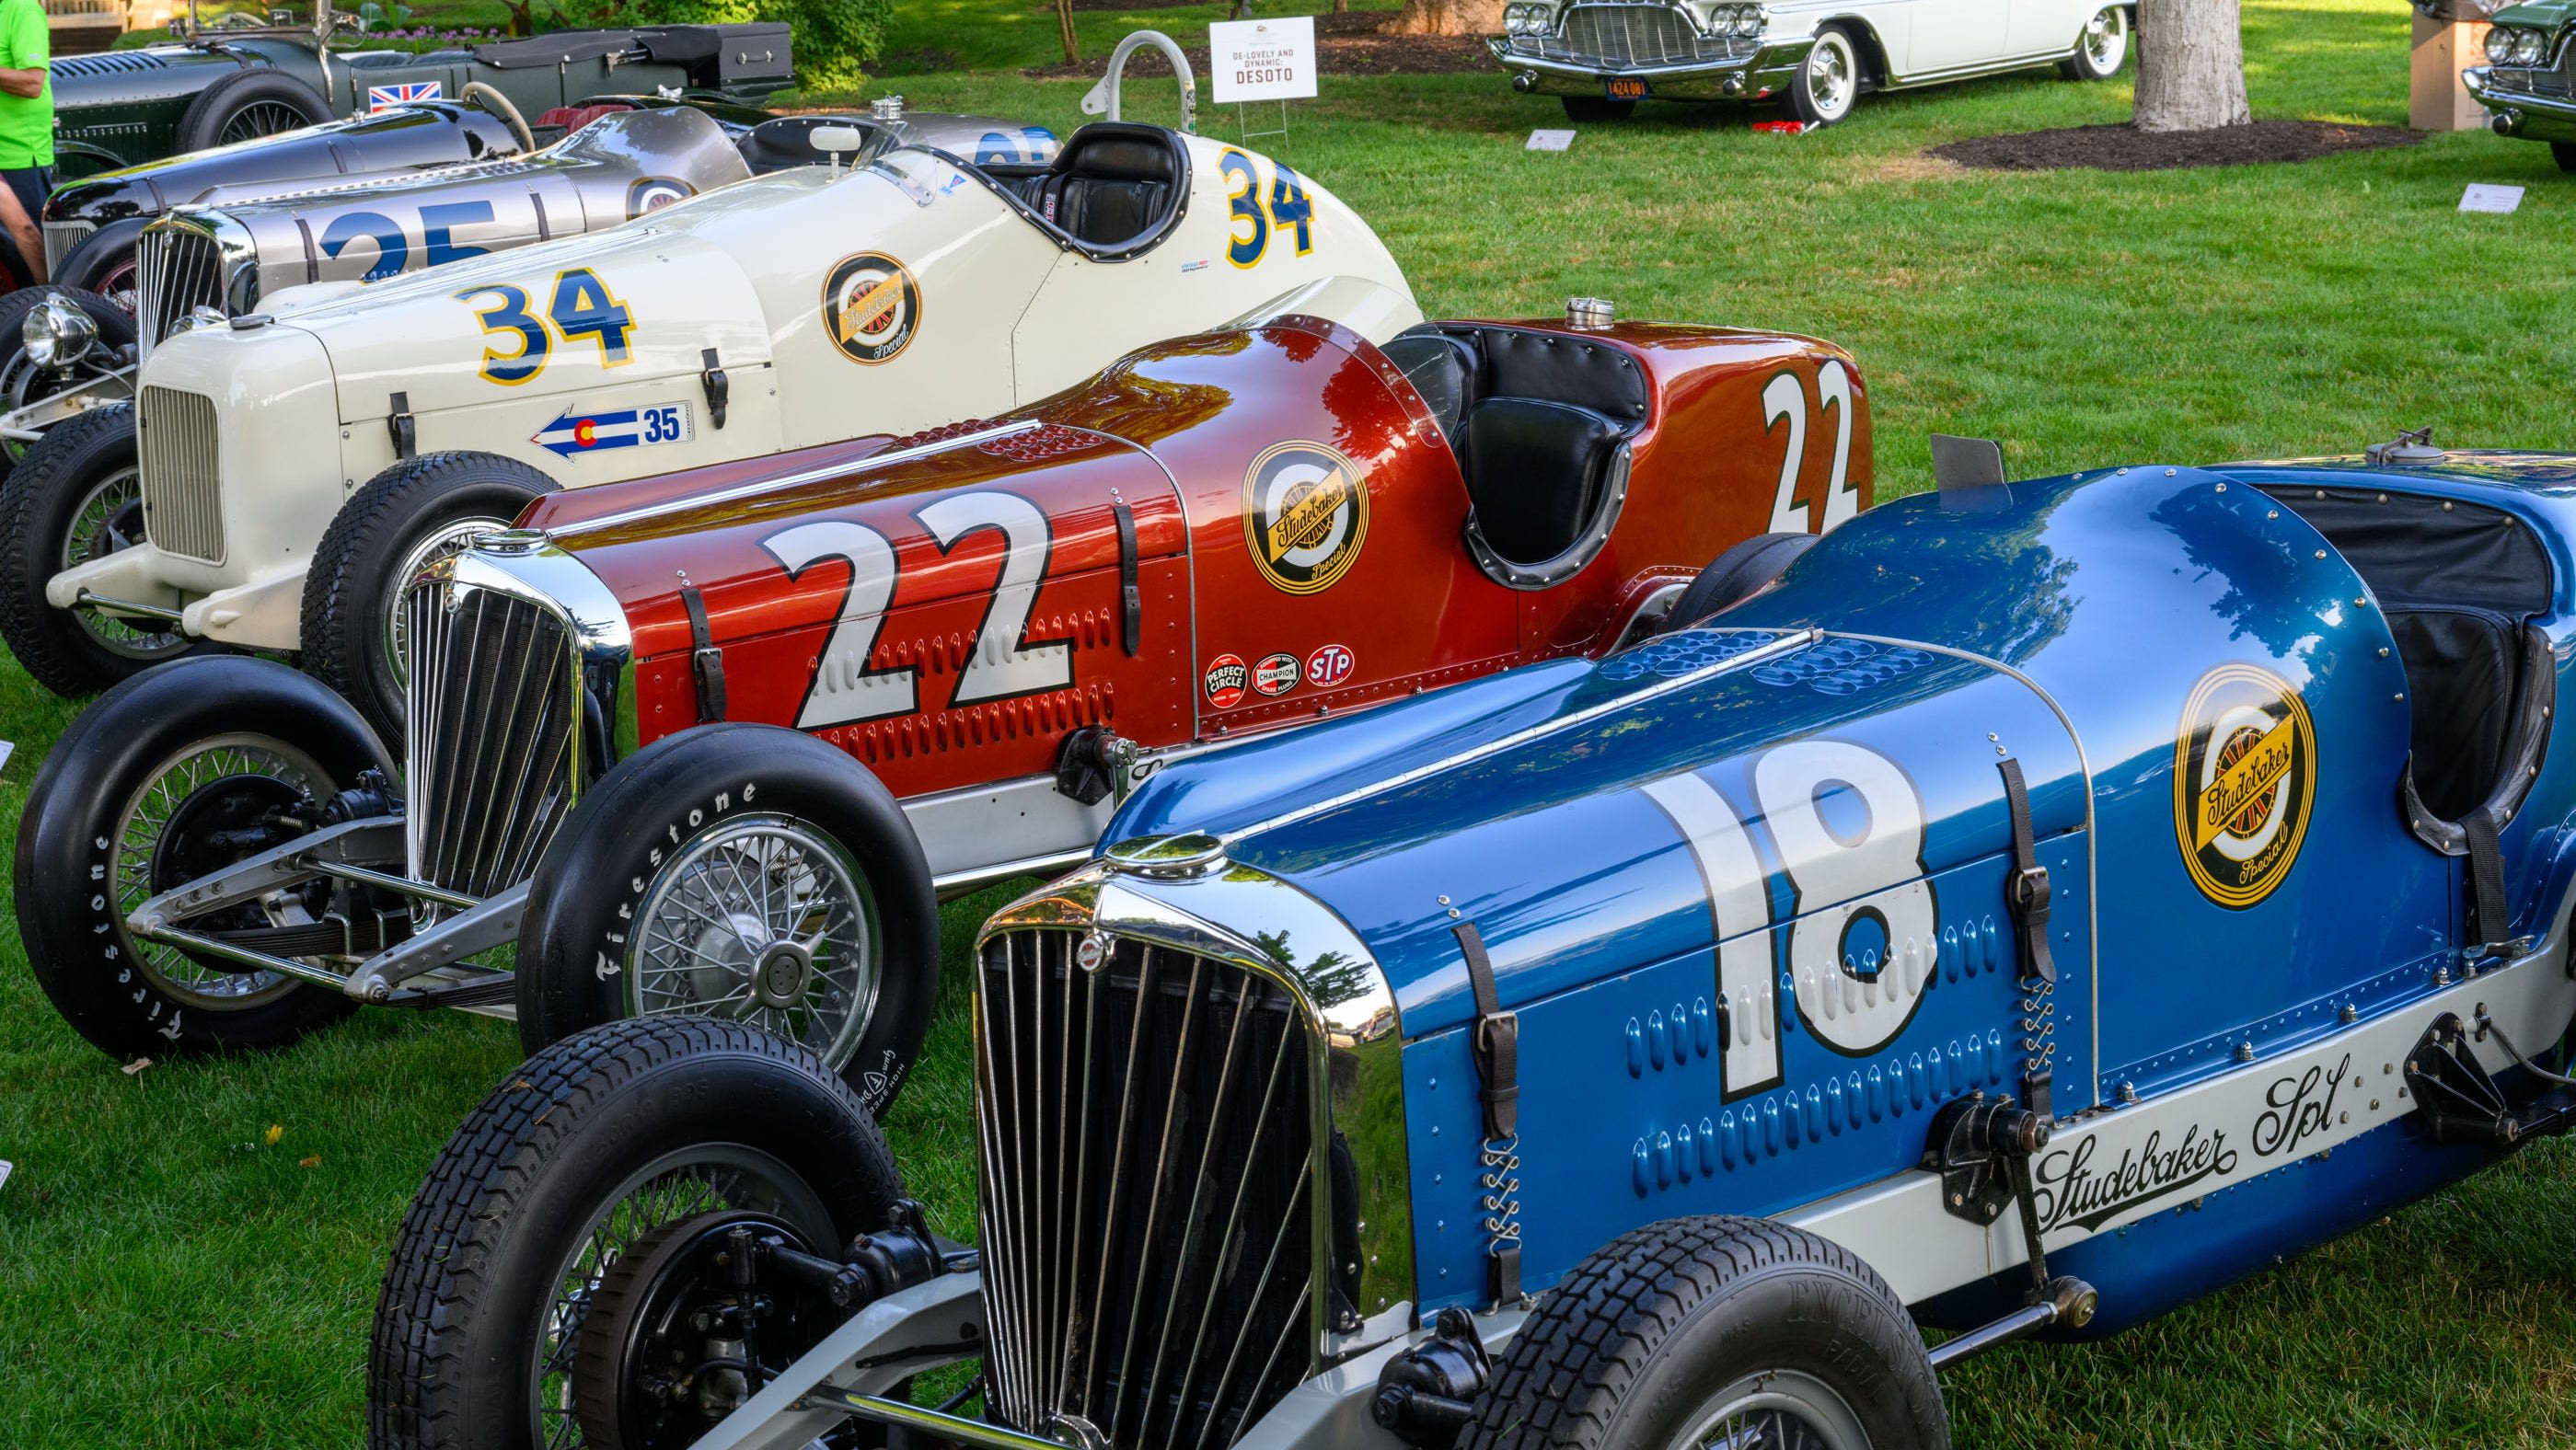 Vintage Studebakers dazzle South Bend attendees of Concours d'Elegance